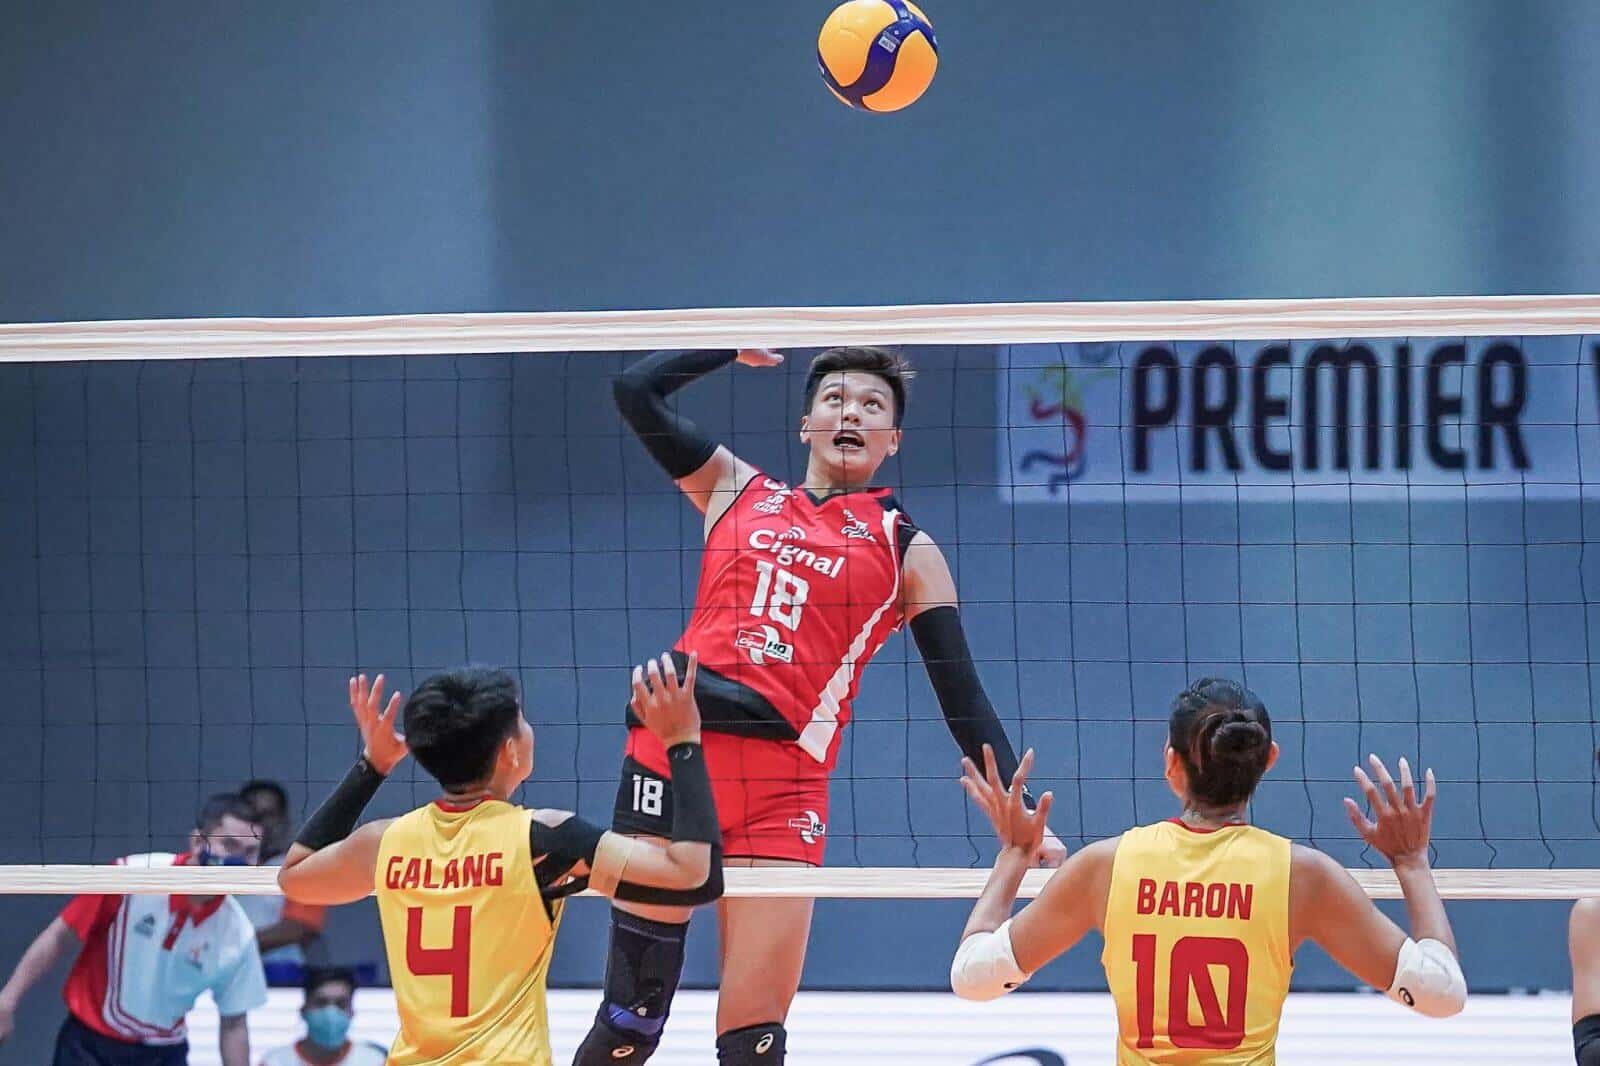 A volleyball player stuns opponents HD Spikers to snatch lead in PVL Open Conference.